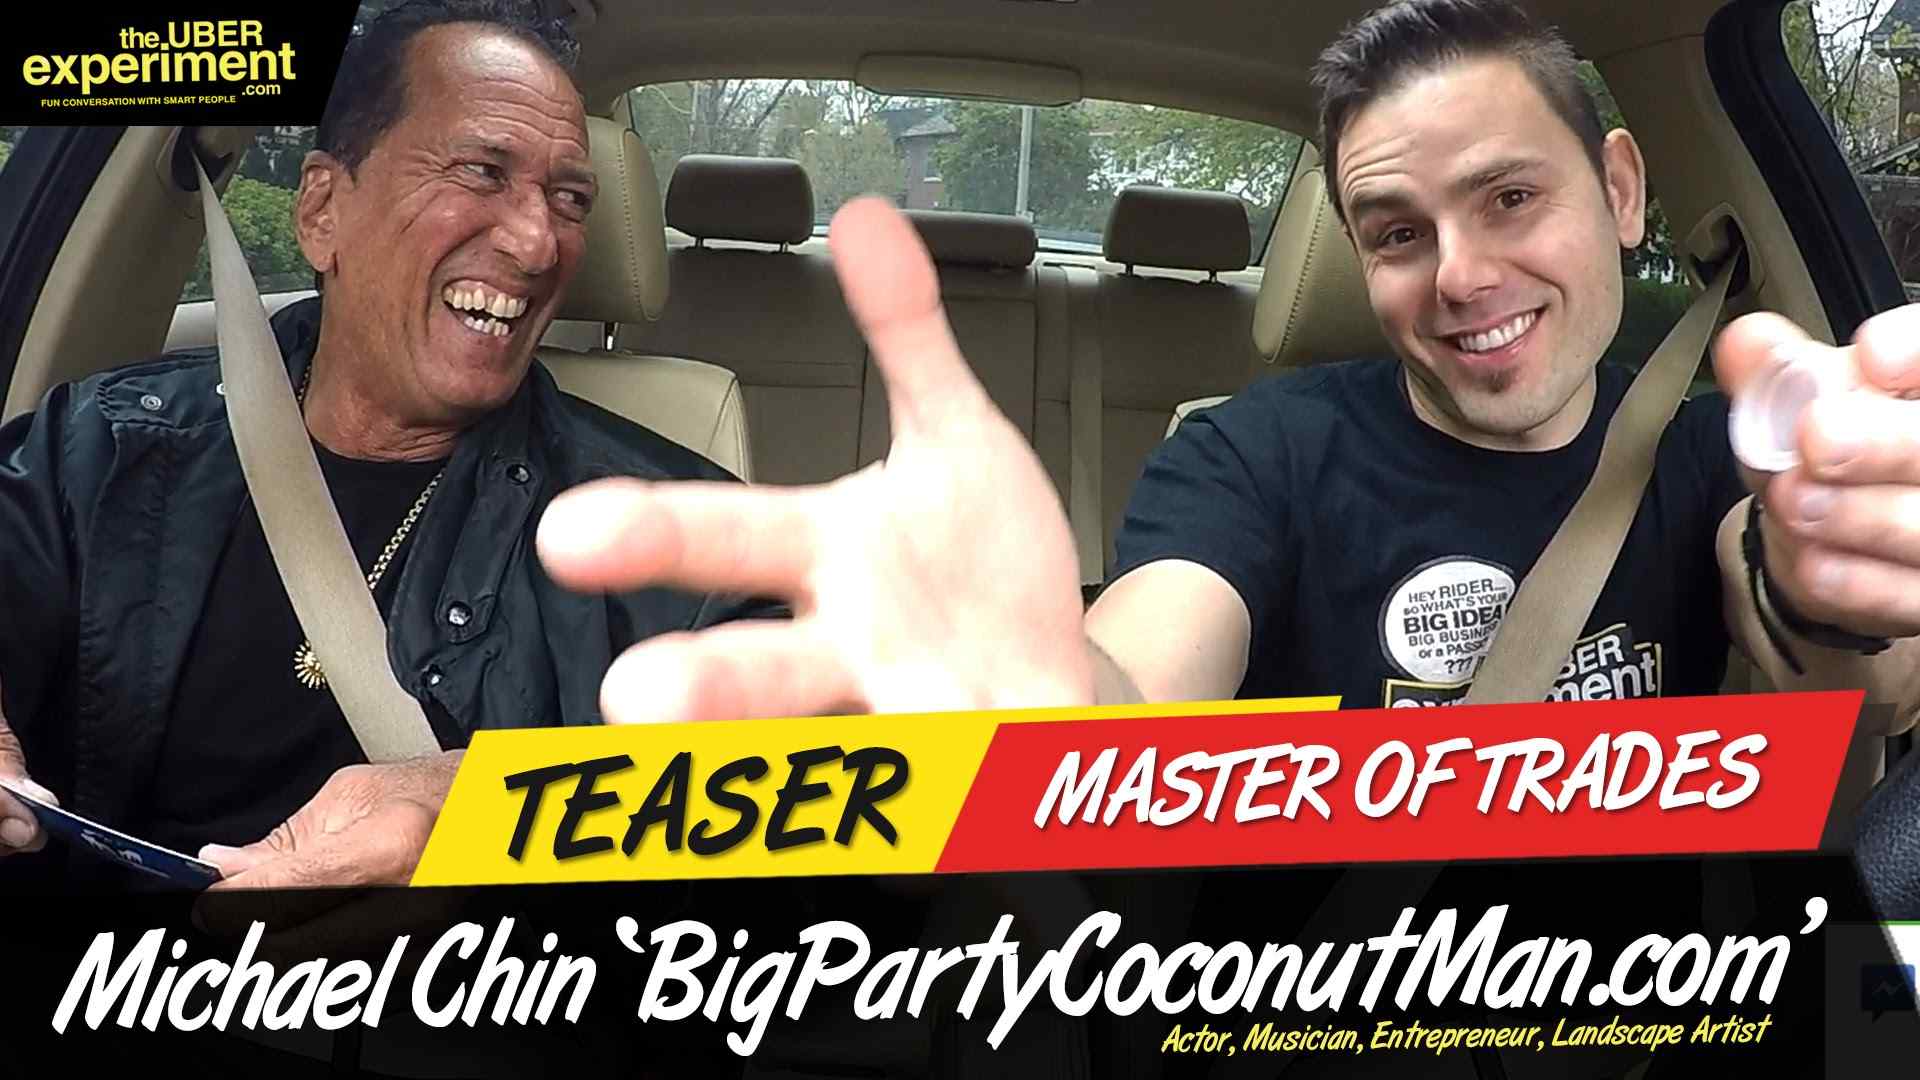 MASTER OF TRADES - Actor, Musician, Big Party Coconut Man MICHAEL CHIN on The UBER Experiment